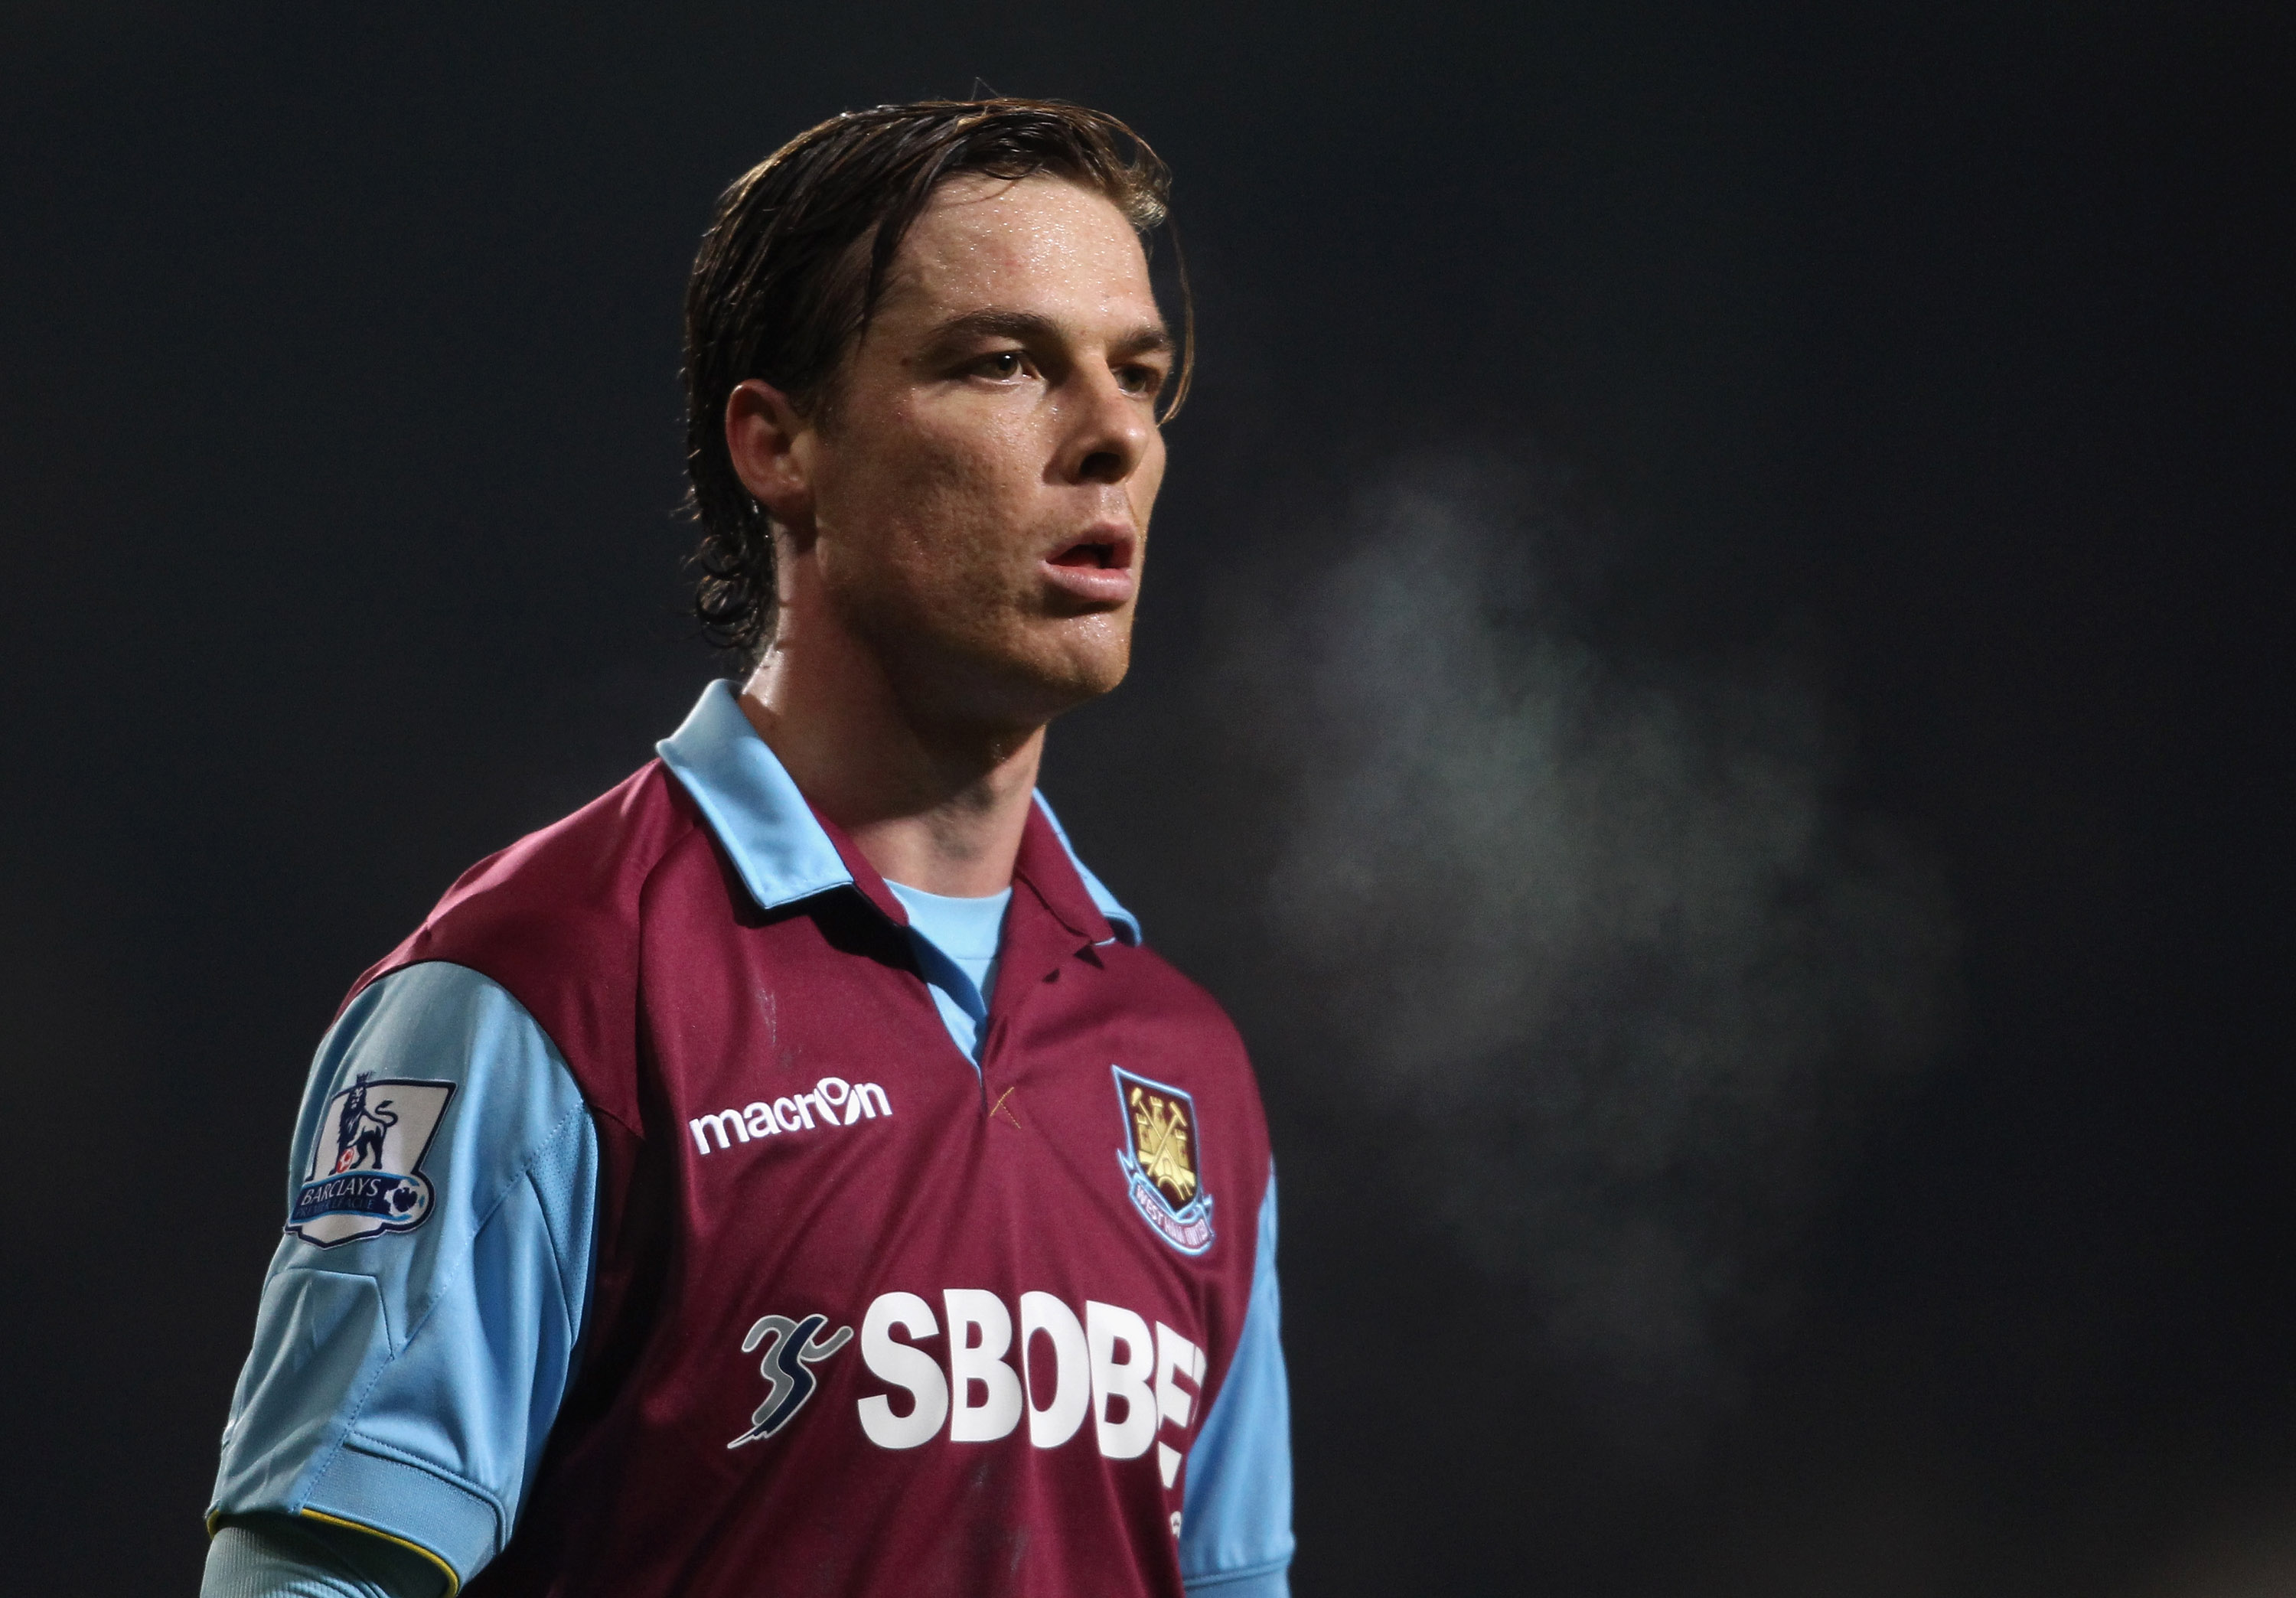 LONDON, ENGLAND - DECEMBER 28:  Scott Parker of West Ham United looks on during the Barclays Premier League match between West Ham United and Everton at the Boleyn Ground on December 28, 2010 in London, England.  (Photo by Scott Heavey/Getty Images)